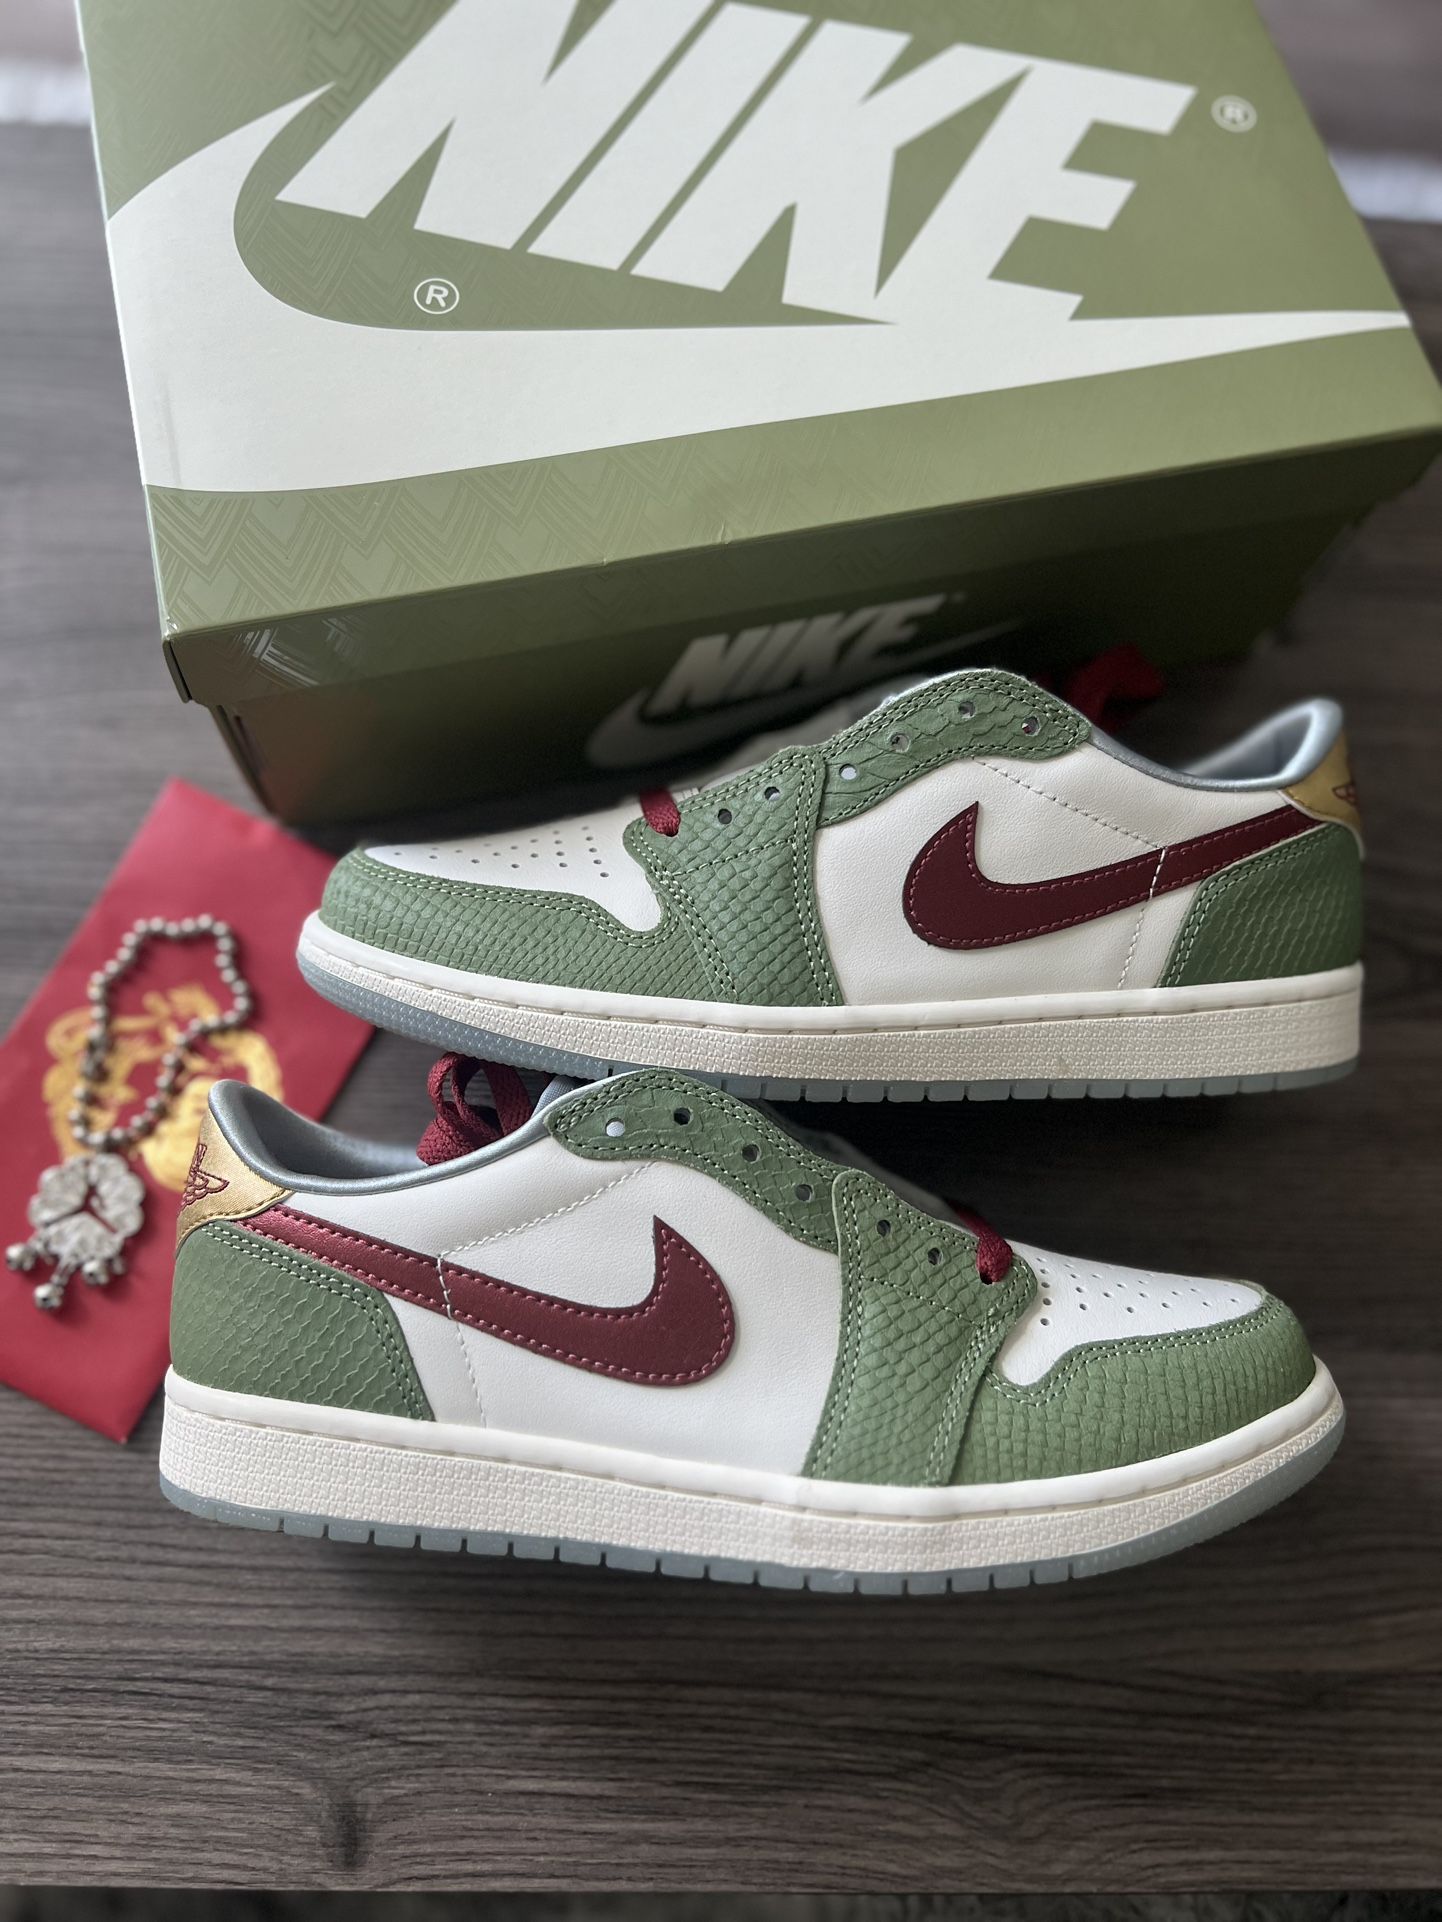 Jordan 1 Low Retro OG CNY - Year of the Dragon Size (Multiple Sizes Available)